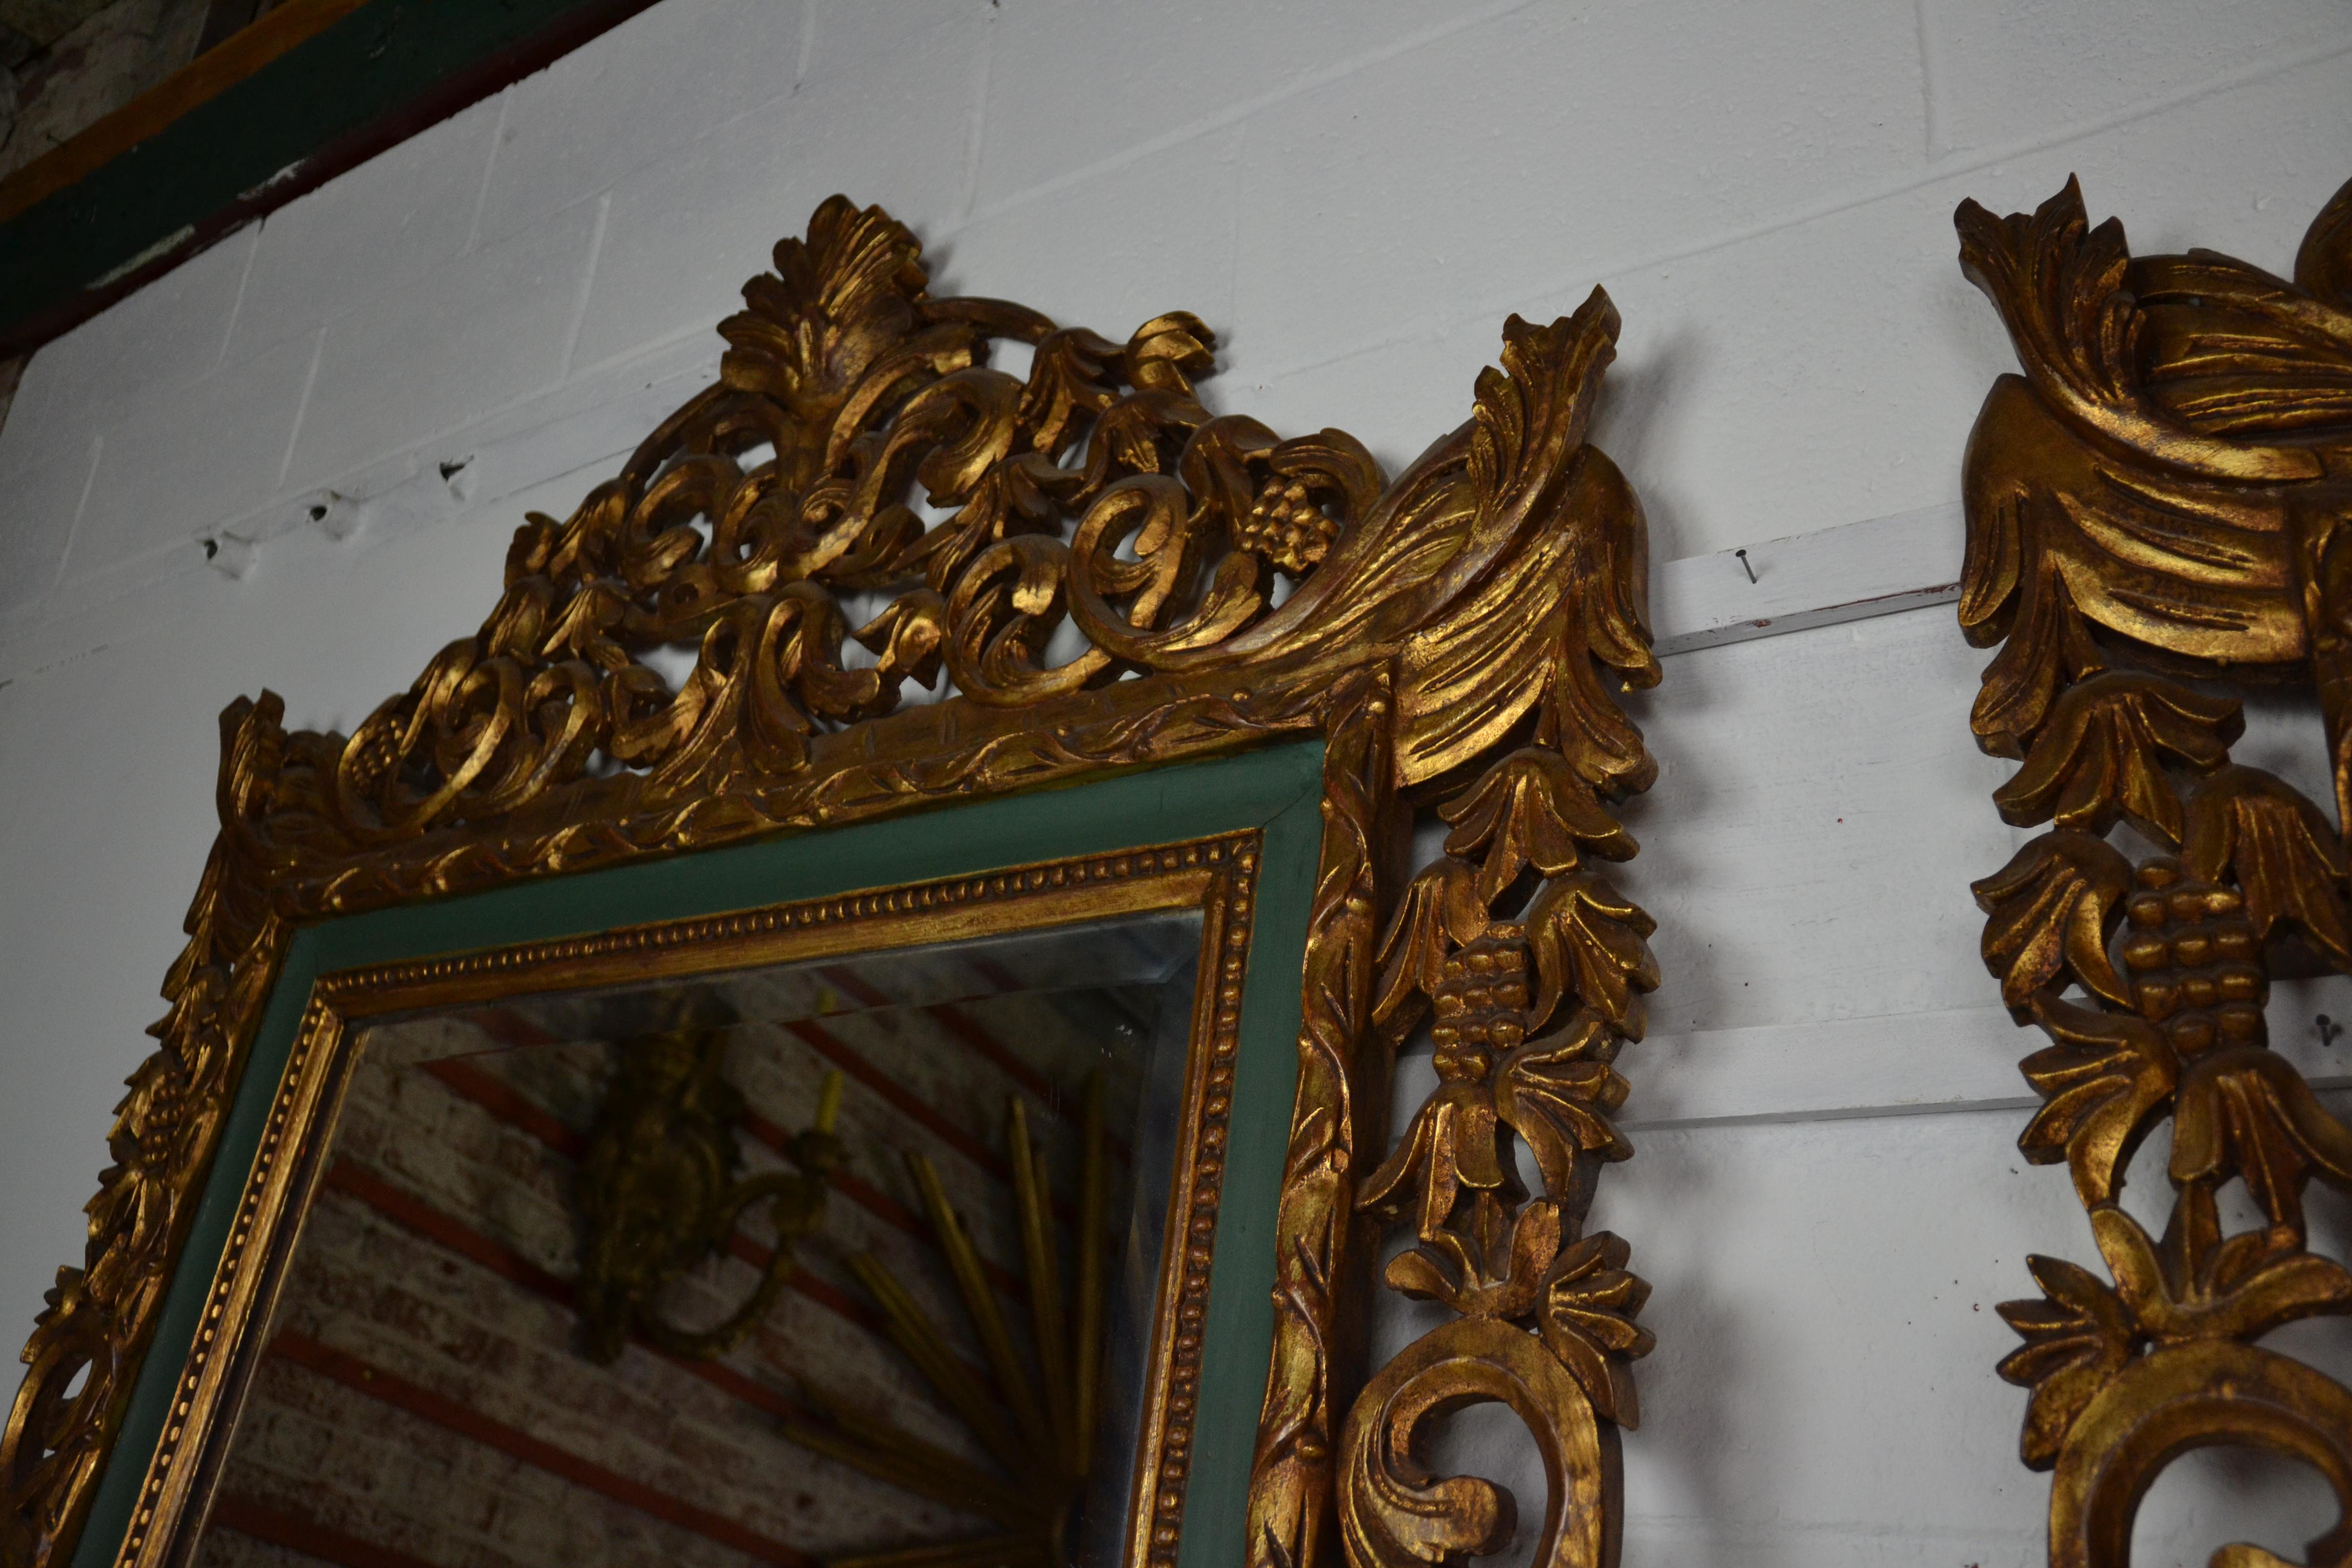 A large pair of hanging or floor standing mirrors with a gilt and green painted finish. Heavy scroll and acanthus leaf carving topped with a shell motif. Wooden plank backed.